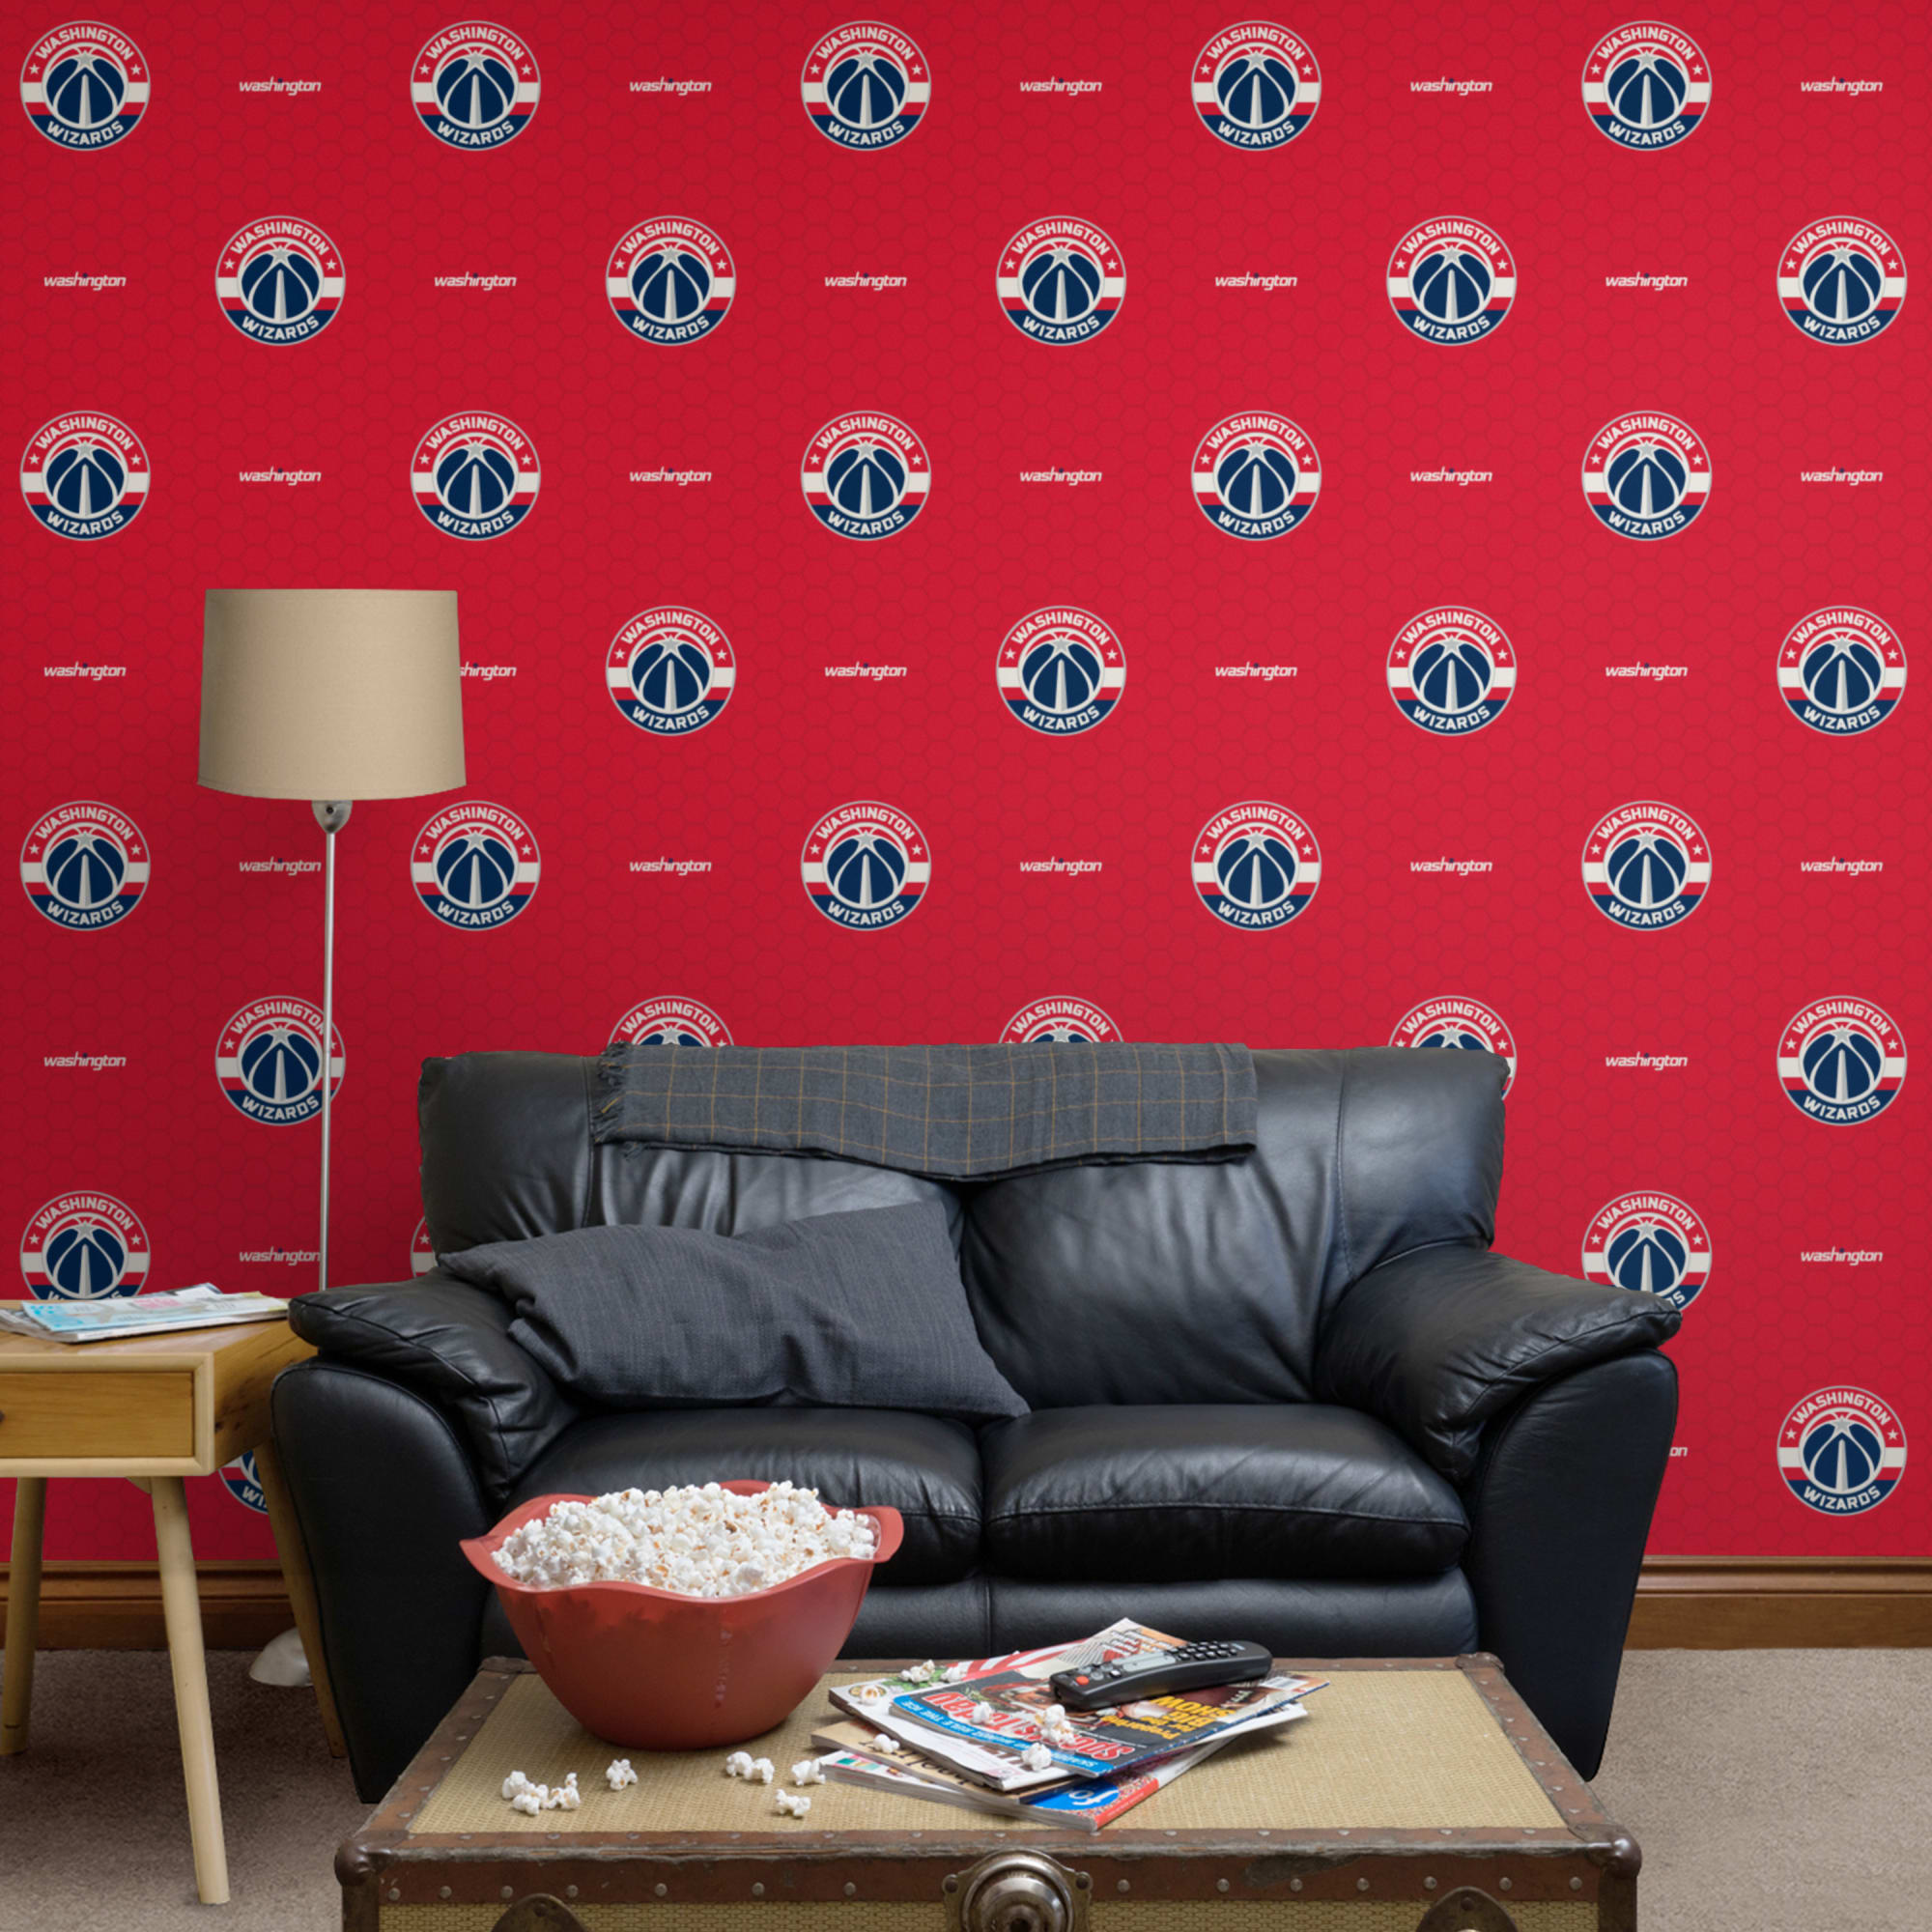 Washington Wizards: Logo Pattern - Officially Licensed Removable Wallpaper 12" x 12" Sample by Fathead